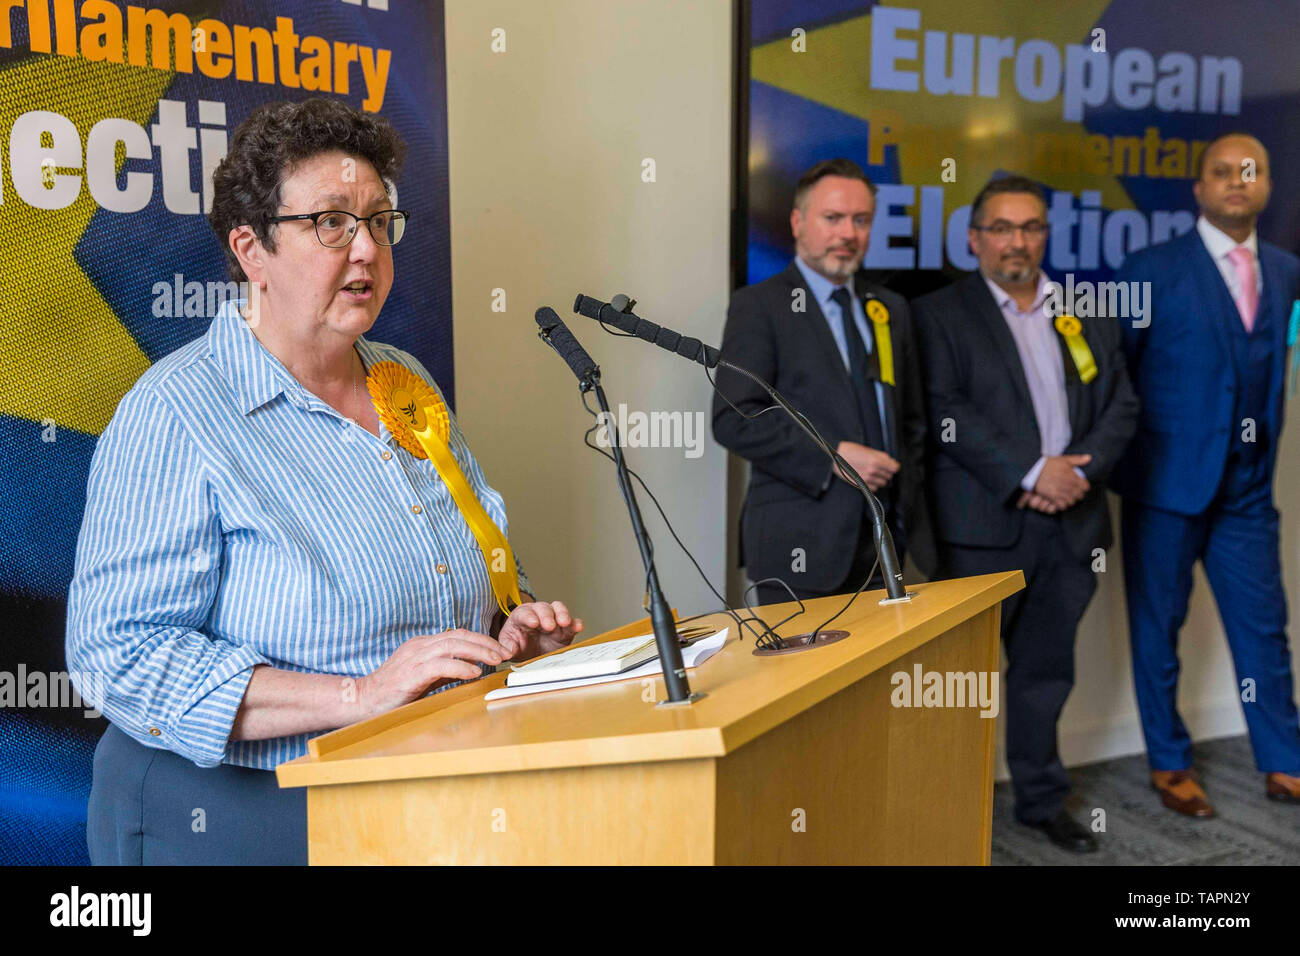 The results of the European Parliamentary Elections for the Scotland Region are announced at the City Chambers in Edinburgh. Scotland's six new MEPs will be the SNP's Alyn Smith, Christian Allard and Aileen McLeod, Louis Stedman-Bruce of the Brexit Party, Sheila Ritchie of the Liberal Democrats and Baroness Nosheena Mobarik of the Conservatives. Pictured: Sheila Ritchie of the Liberal Democrats Stock Photo